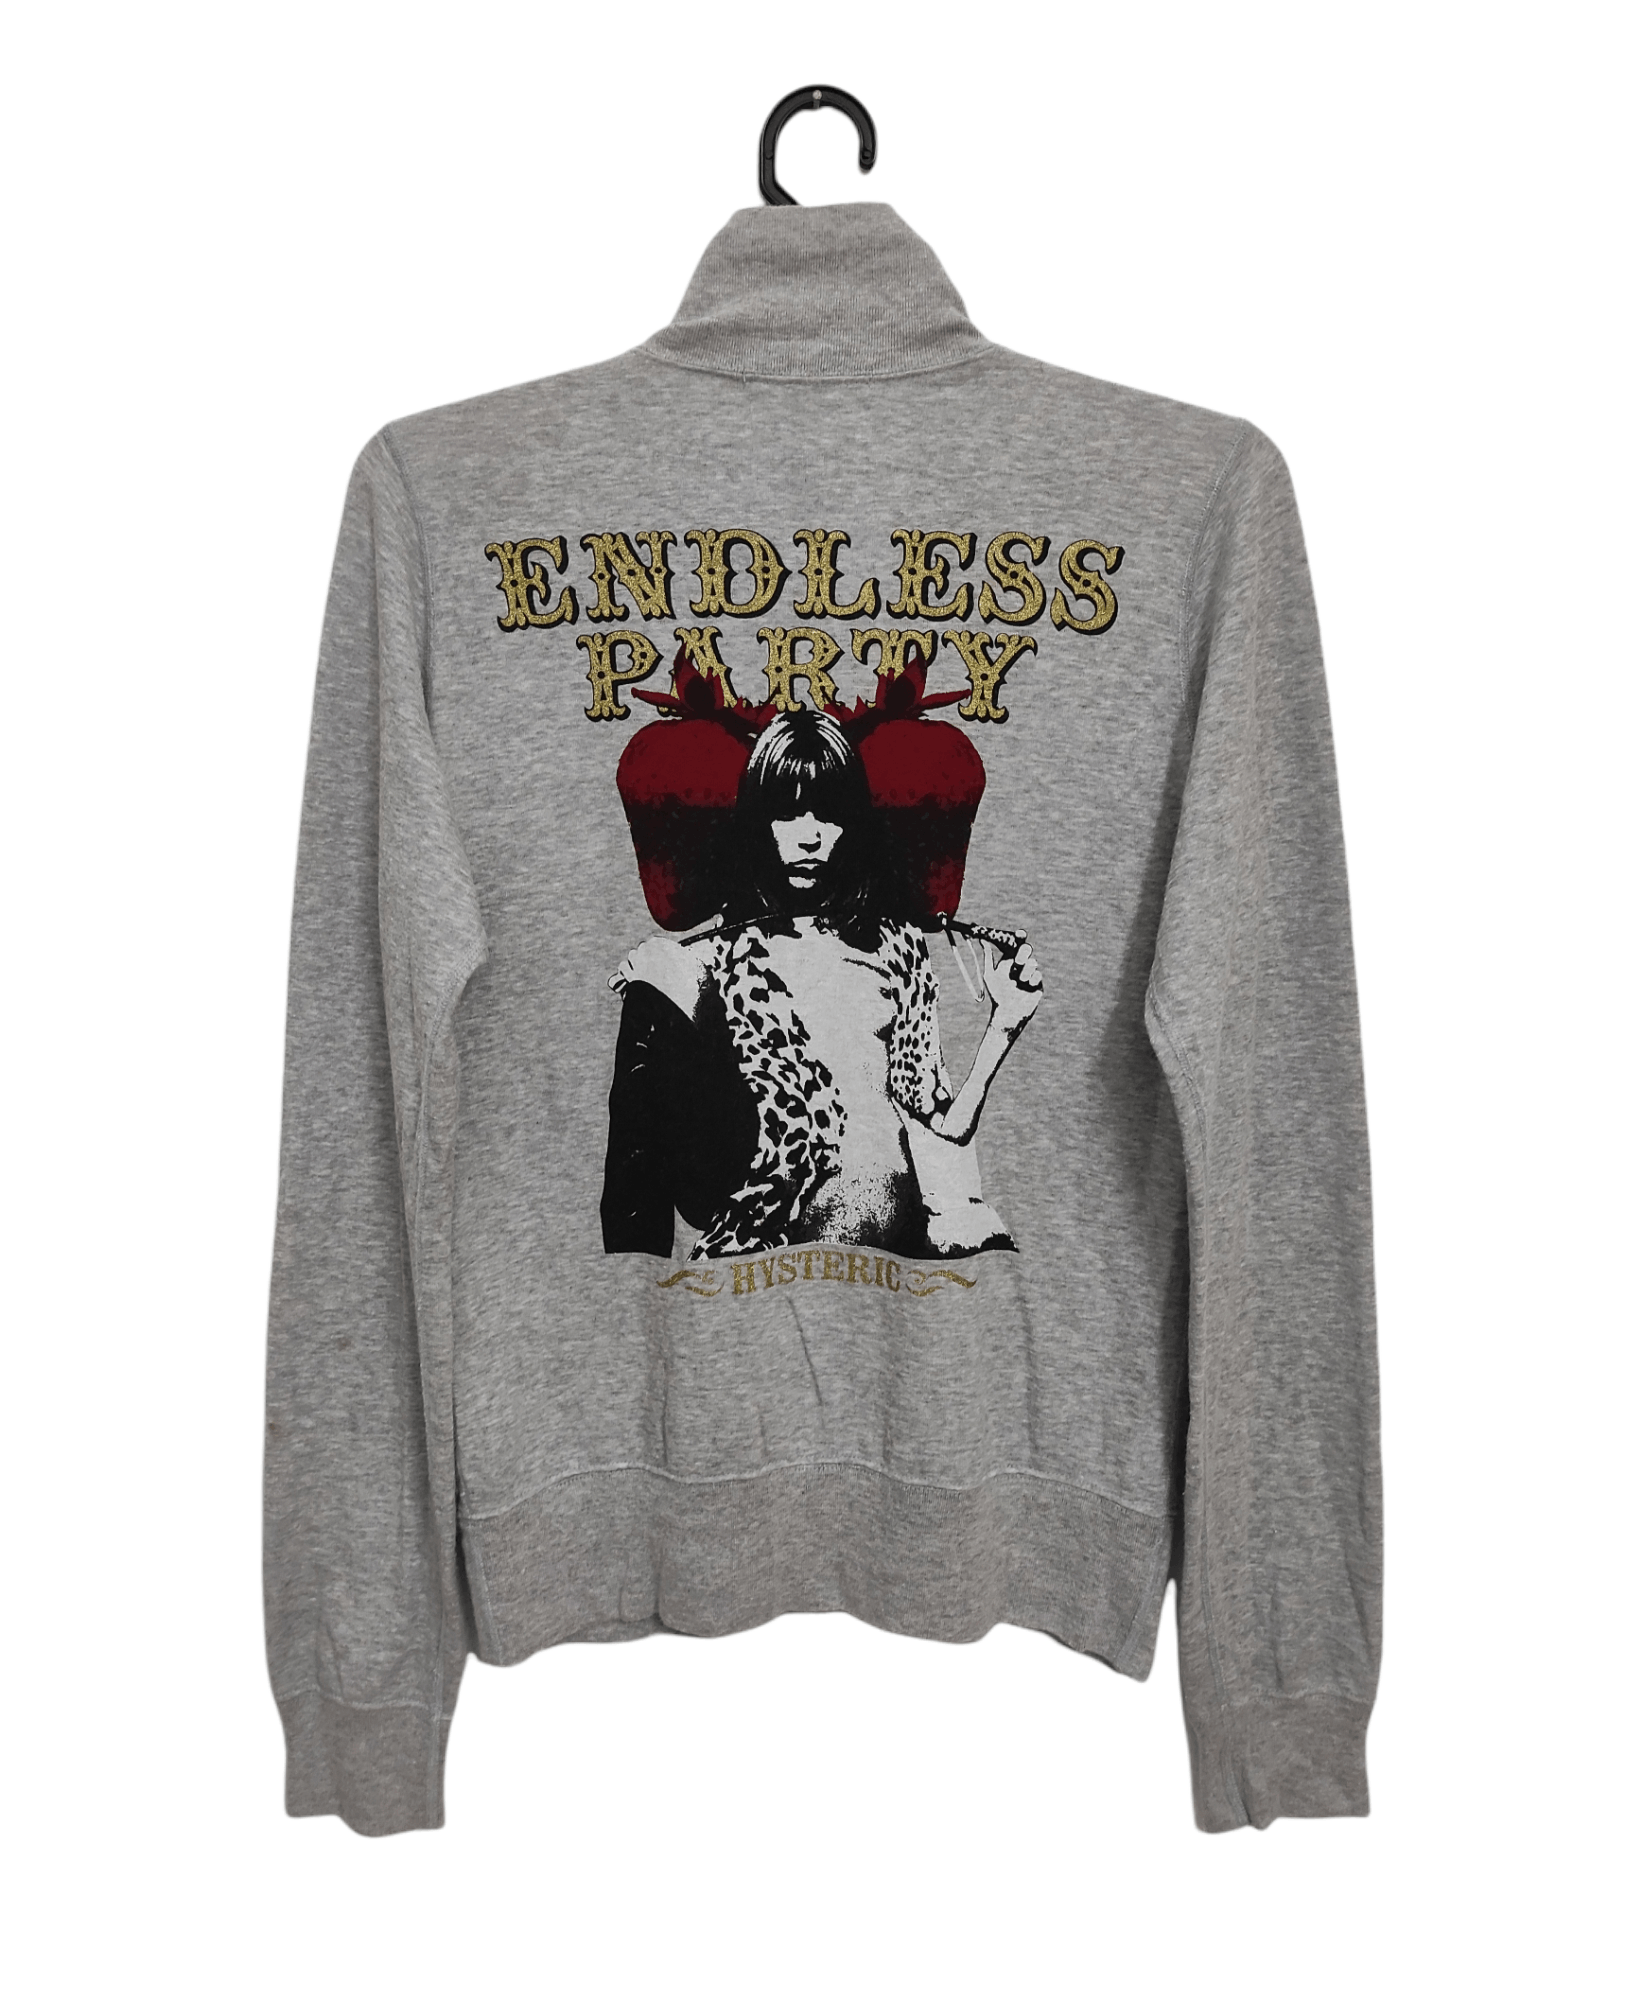 Archival Clothing Archive HYSTERIC GLAMOUR ENDLESS PARTY ZIP UP sweatshirt  | Grailed